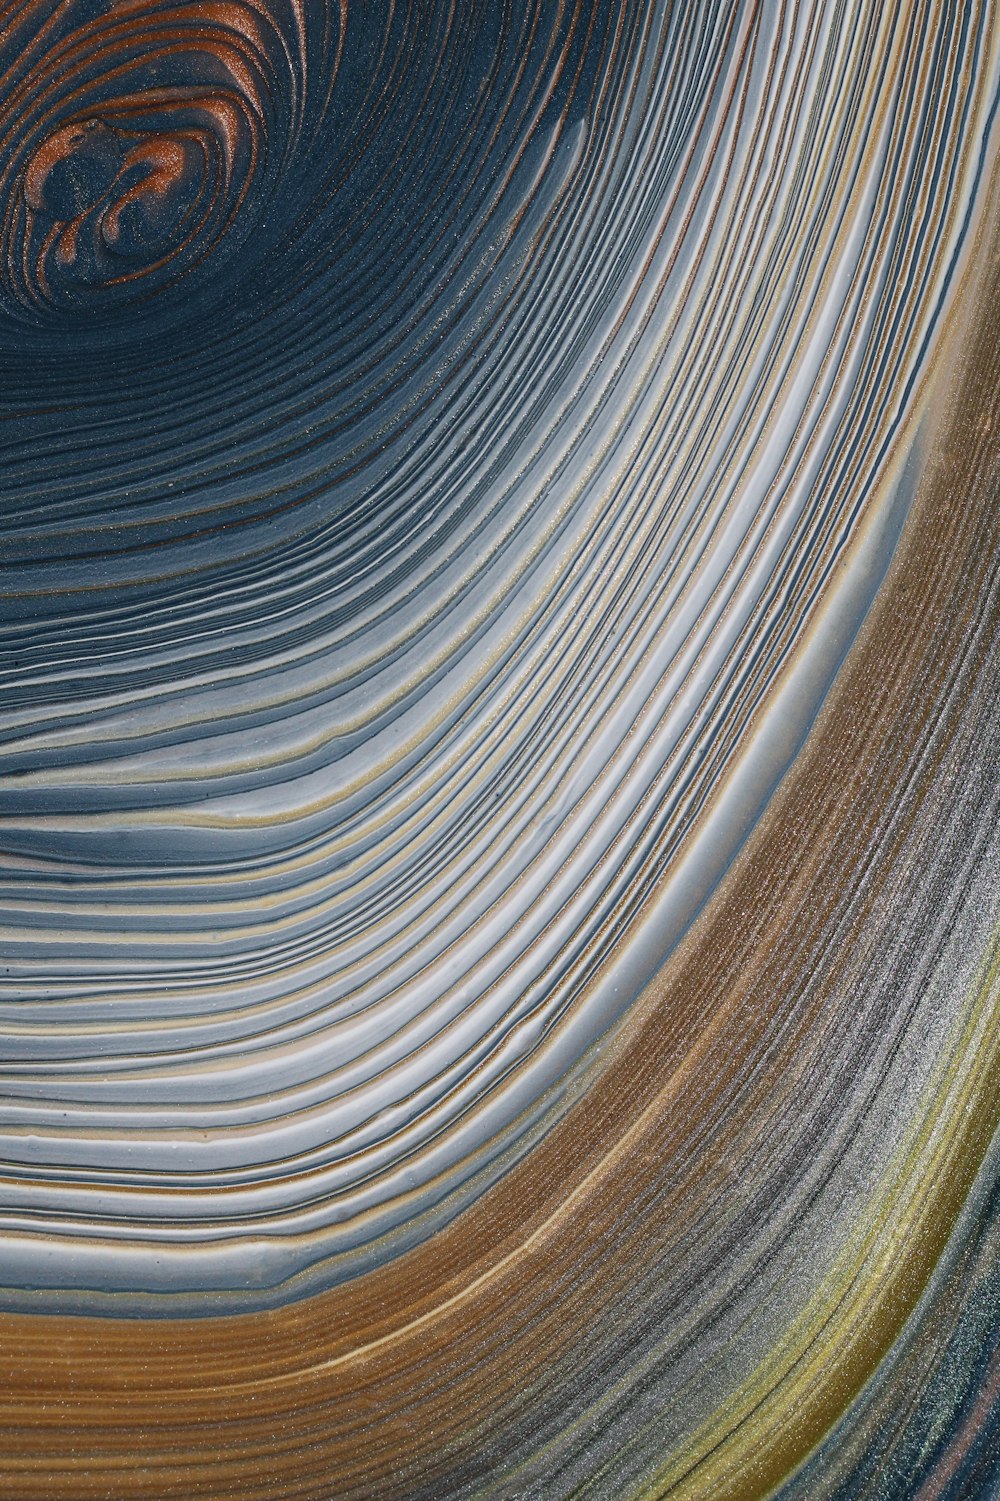 a picture of a swirl in the middle of a picture